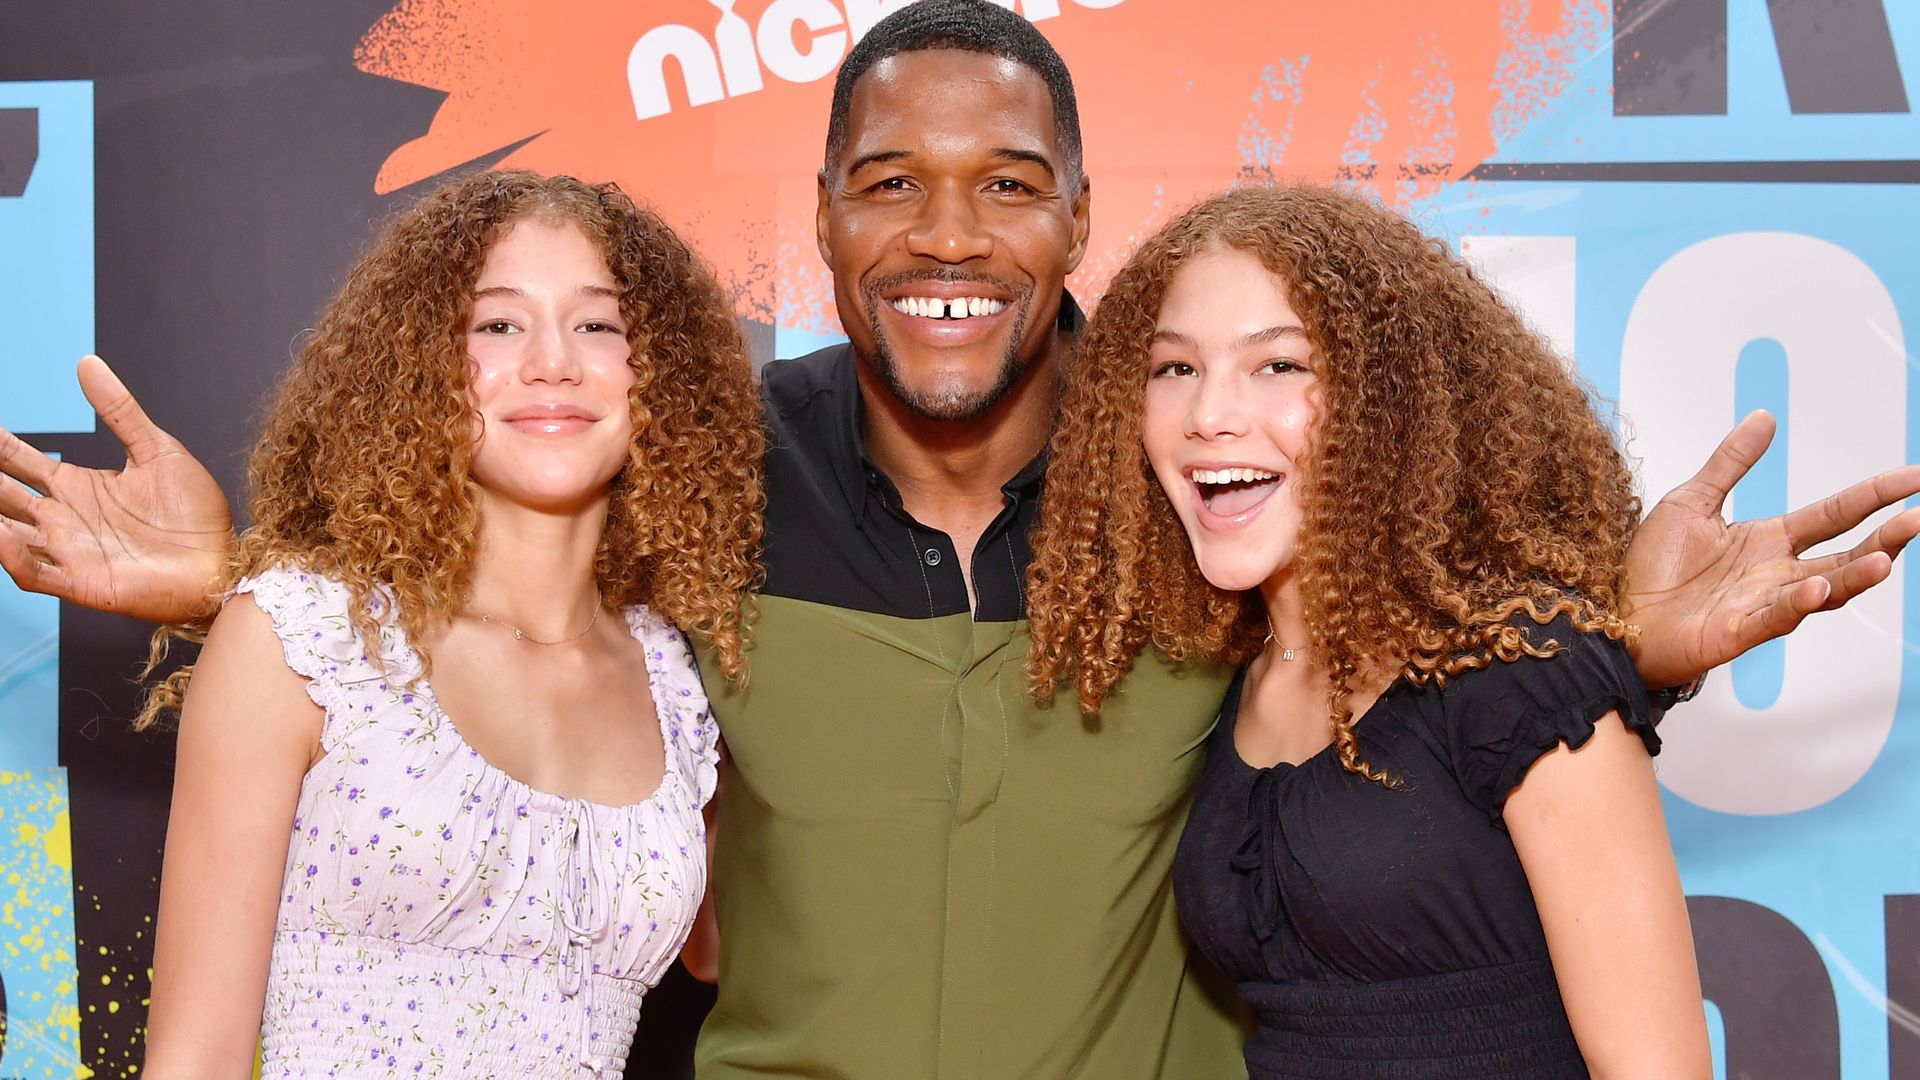 Michael Strahan with his twin daughters Sophia and Isabella smiling on a red carpet